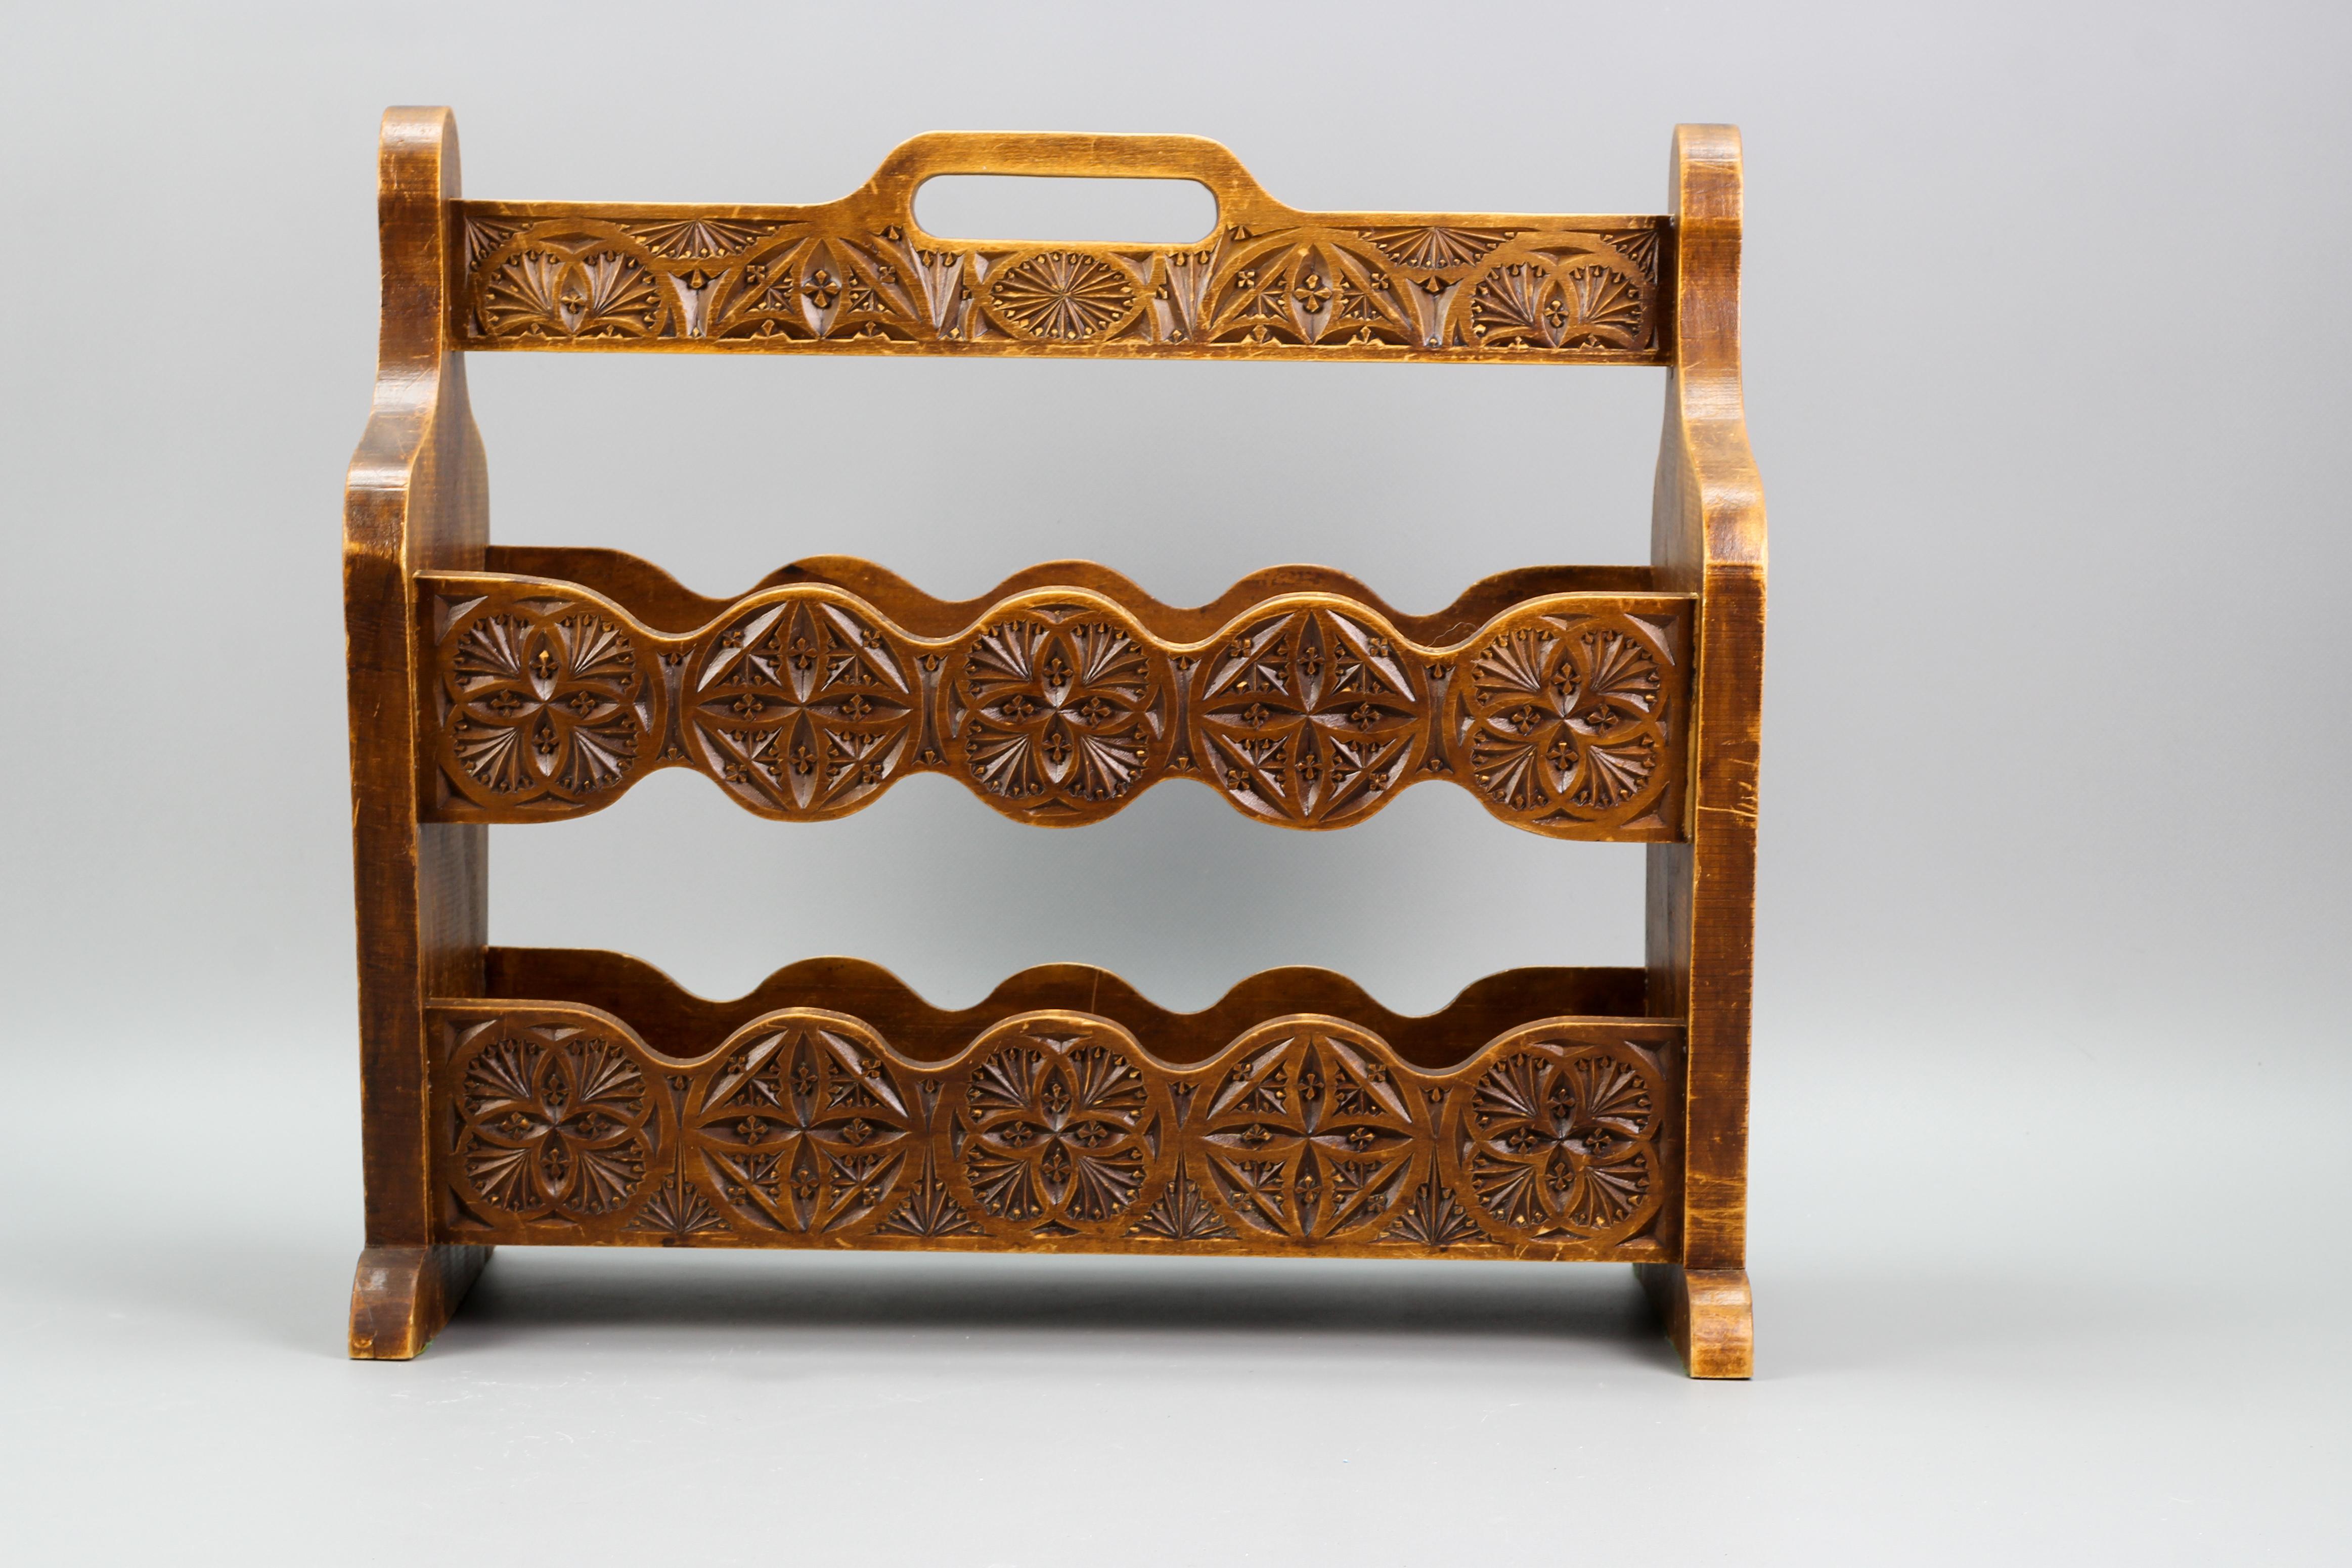 Dutch vintage carved wood magazine rack from the circa 1970s. This adorable and very decorative magazine rack is carved in the Frisian notch cut technique.
Dimensions: height: 40 cm / 15.74 in; width: 44.5 cm / 17.51 in; depth: 23 cm / 9.05 in.